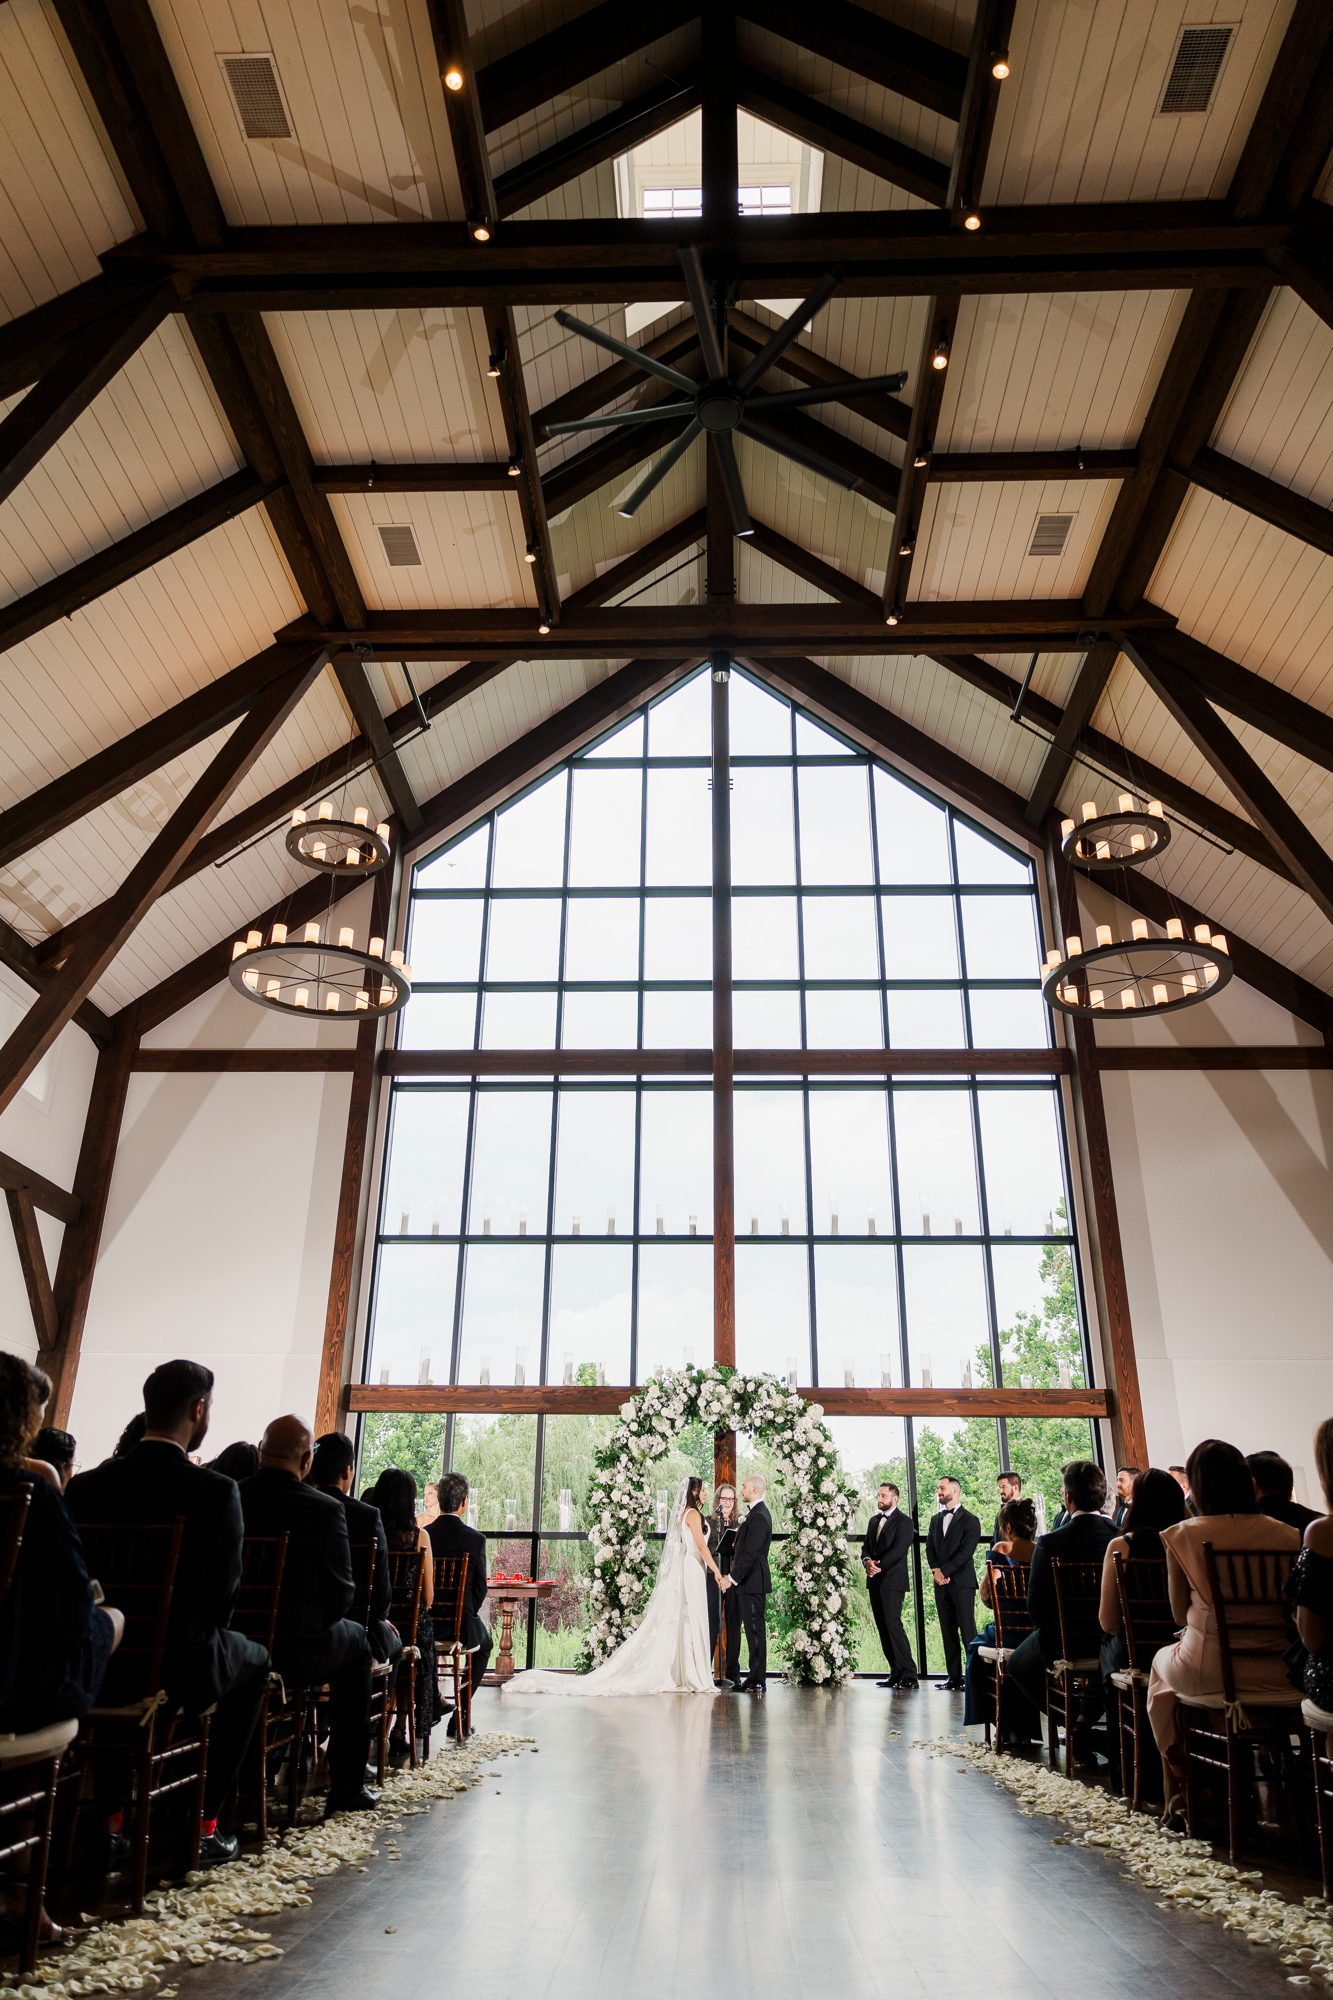 Magical New Jersey Wedding at Crossed Keys Estate